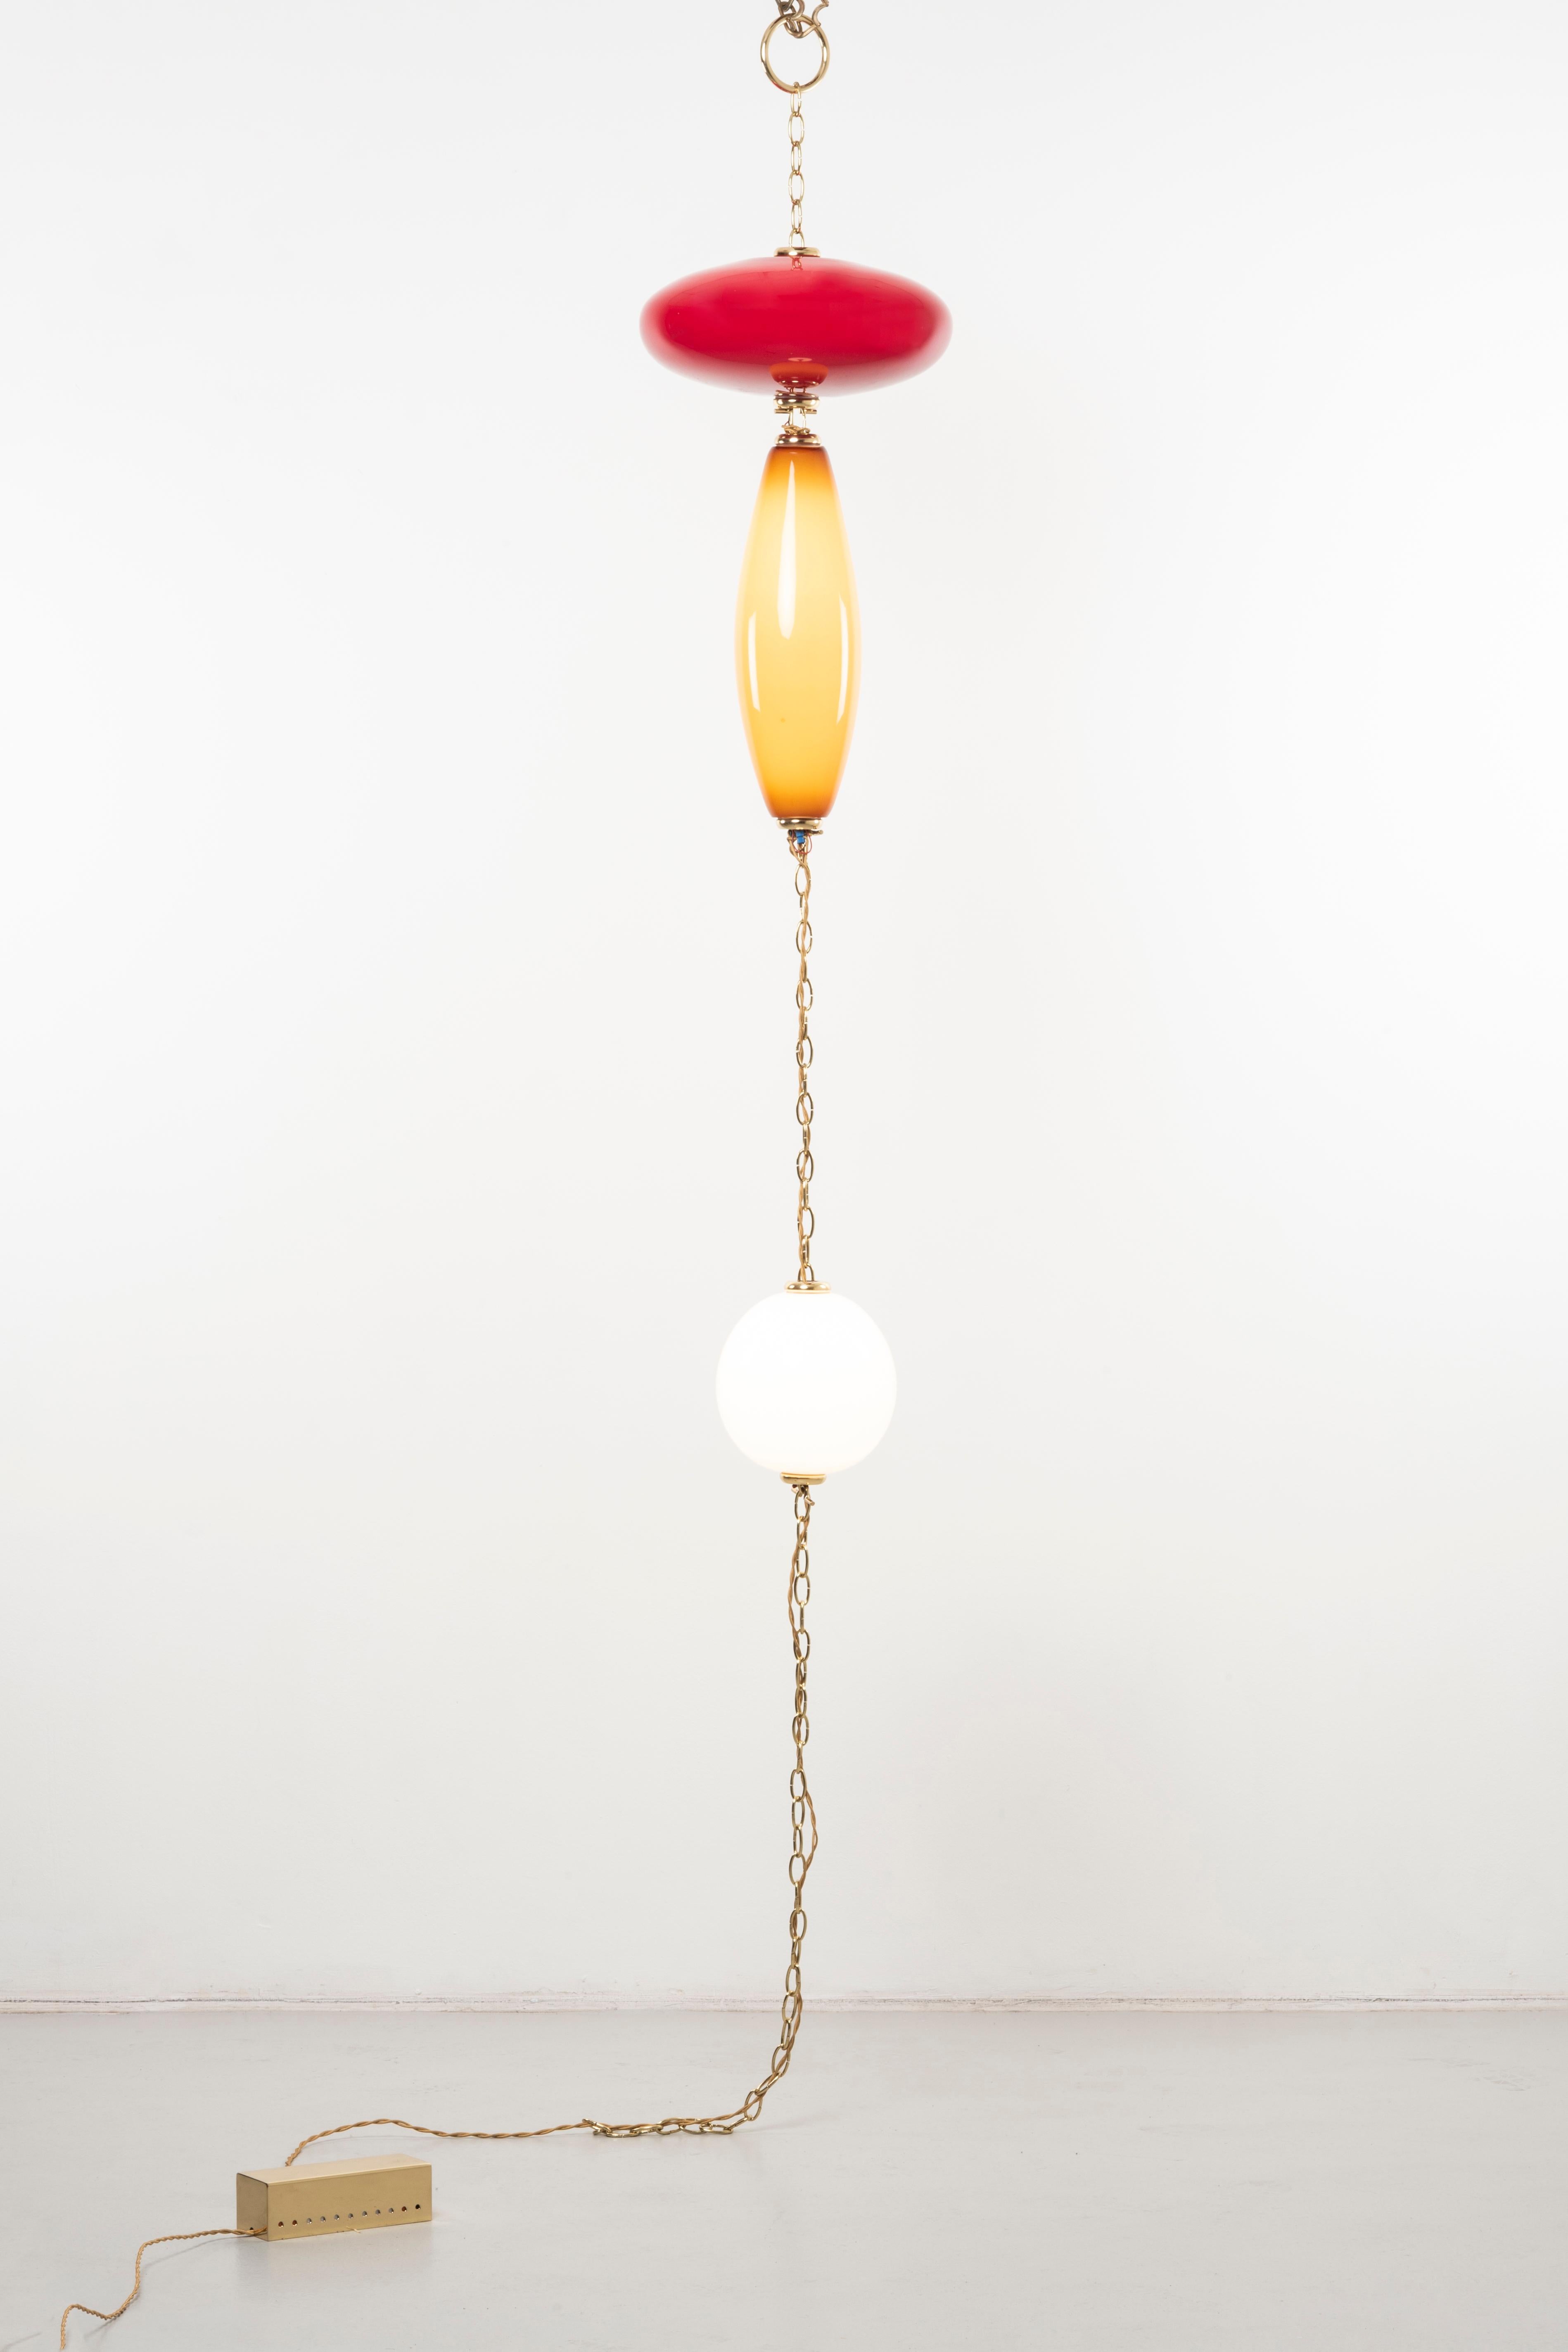 Ceiling to floor lamp by Analogia Project
Necklace Collection. Italy, 2018. 3 elements. Brass, LED, glass. H max 351 cm. H max 138.2 in.
Please note: Prices do not include VAT. VAT may be applied depending on the ship-to location.